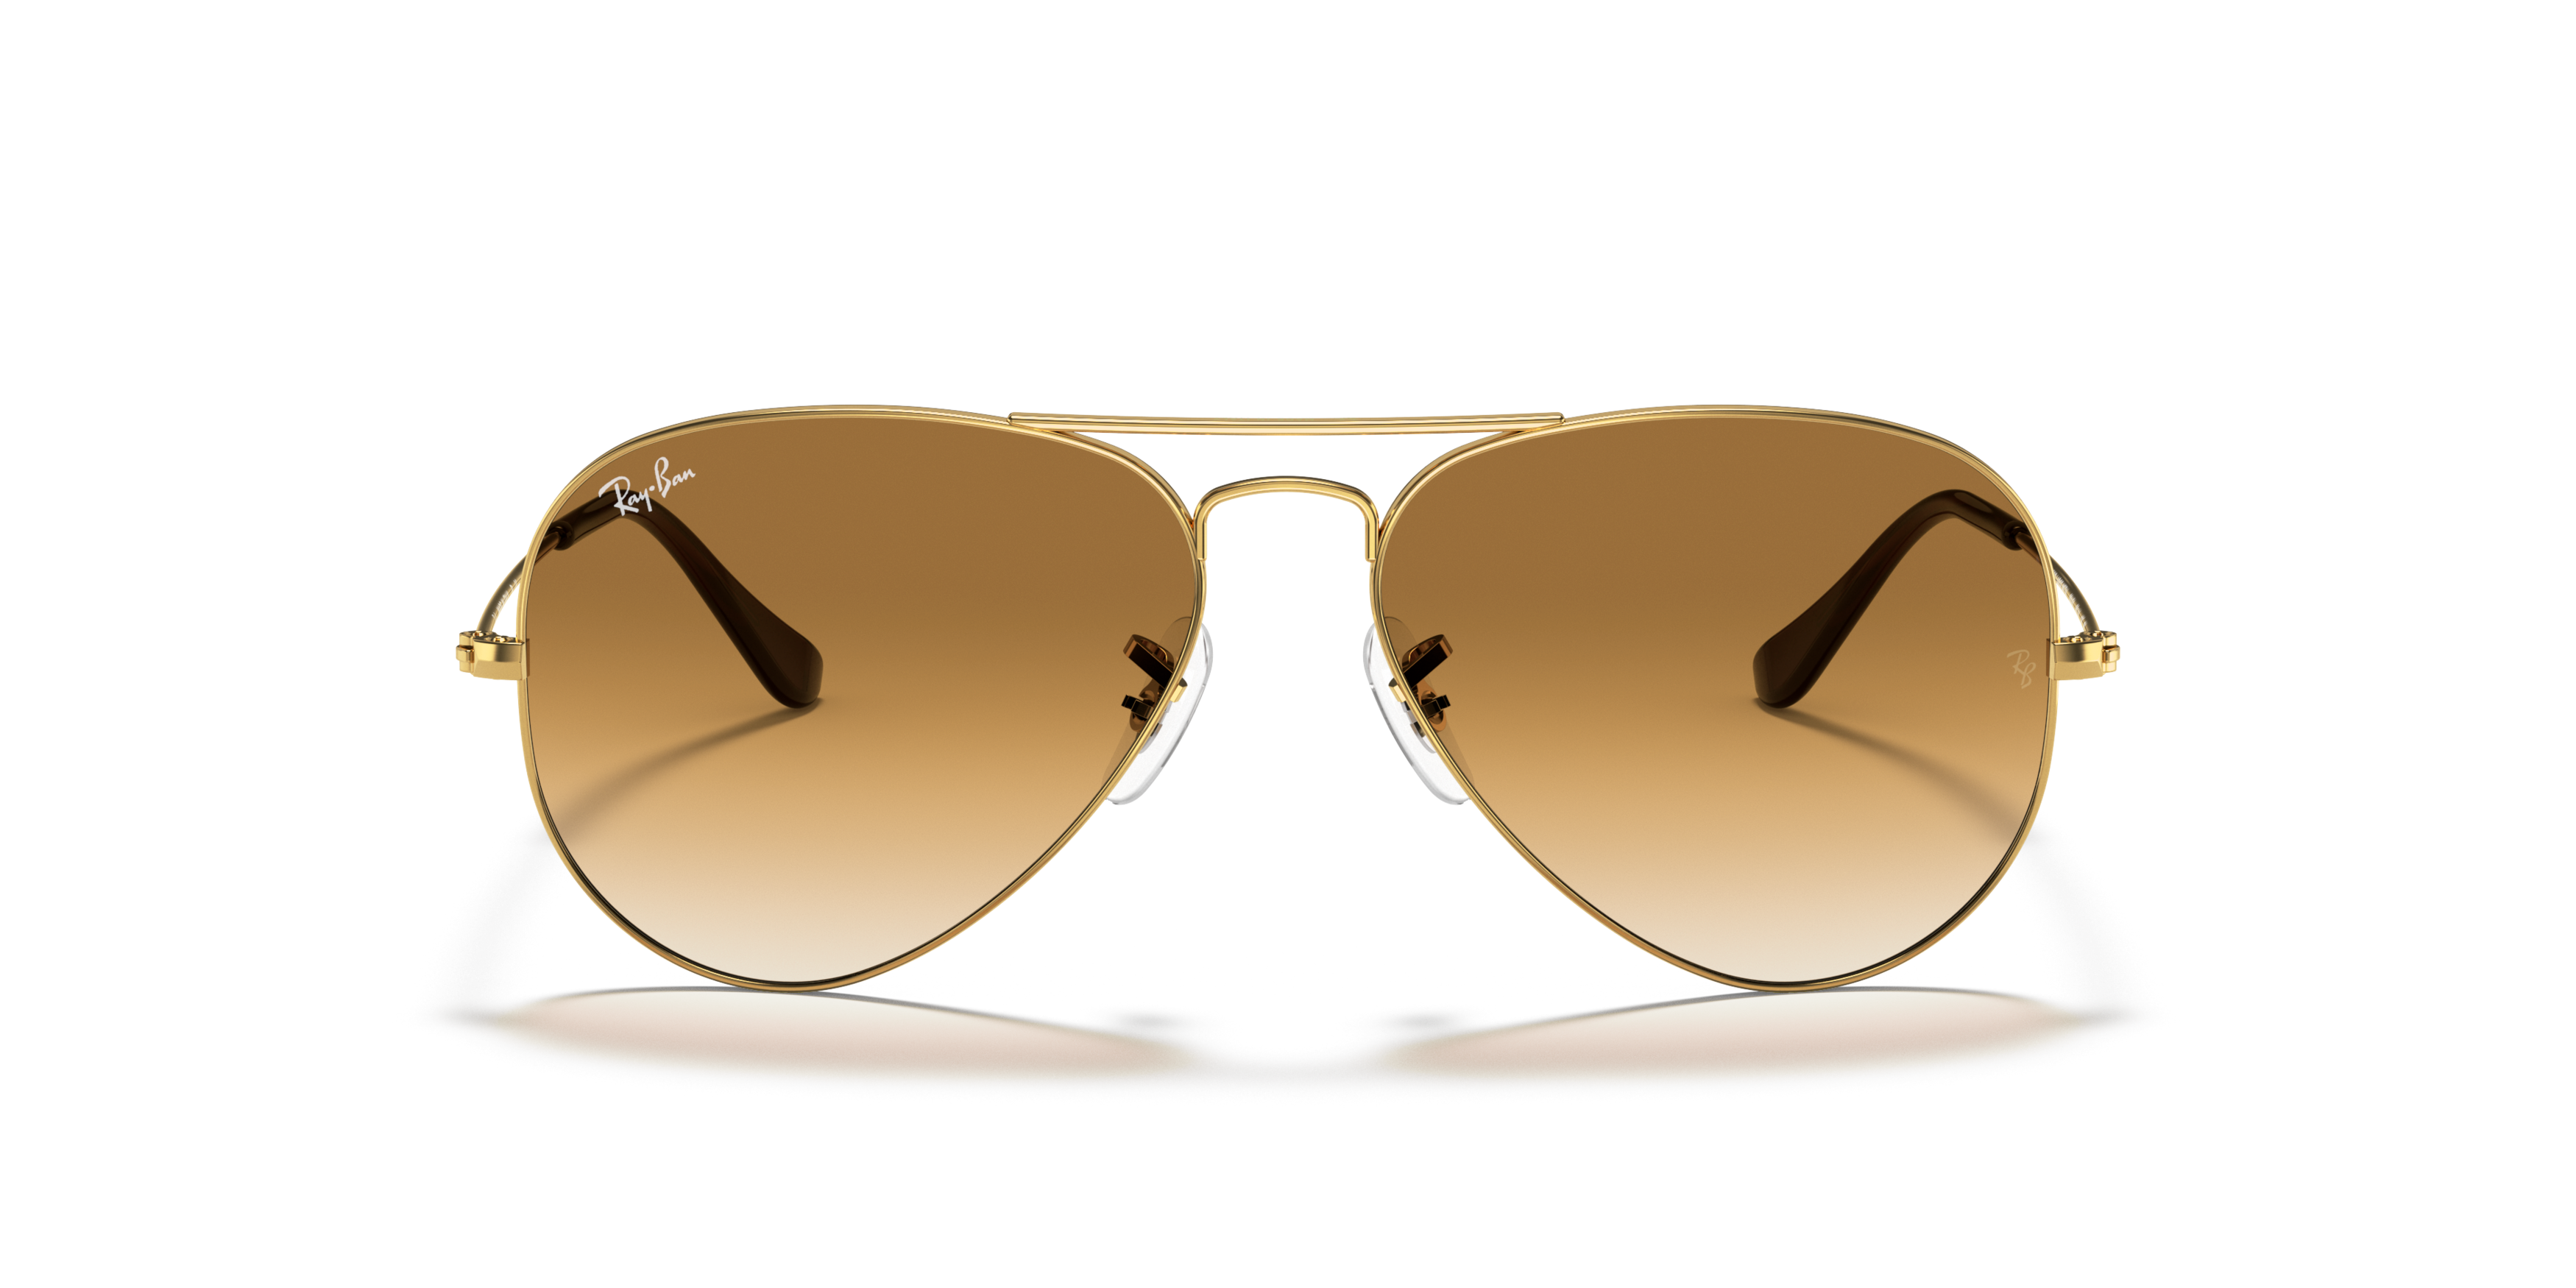 [products.image.front] Ray-Ban Aviator Gradient RB3025 001/51